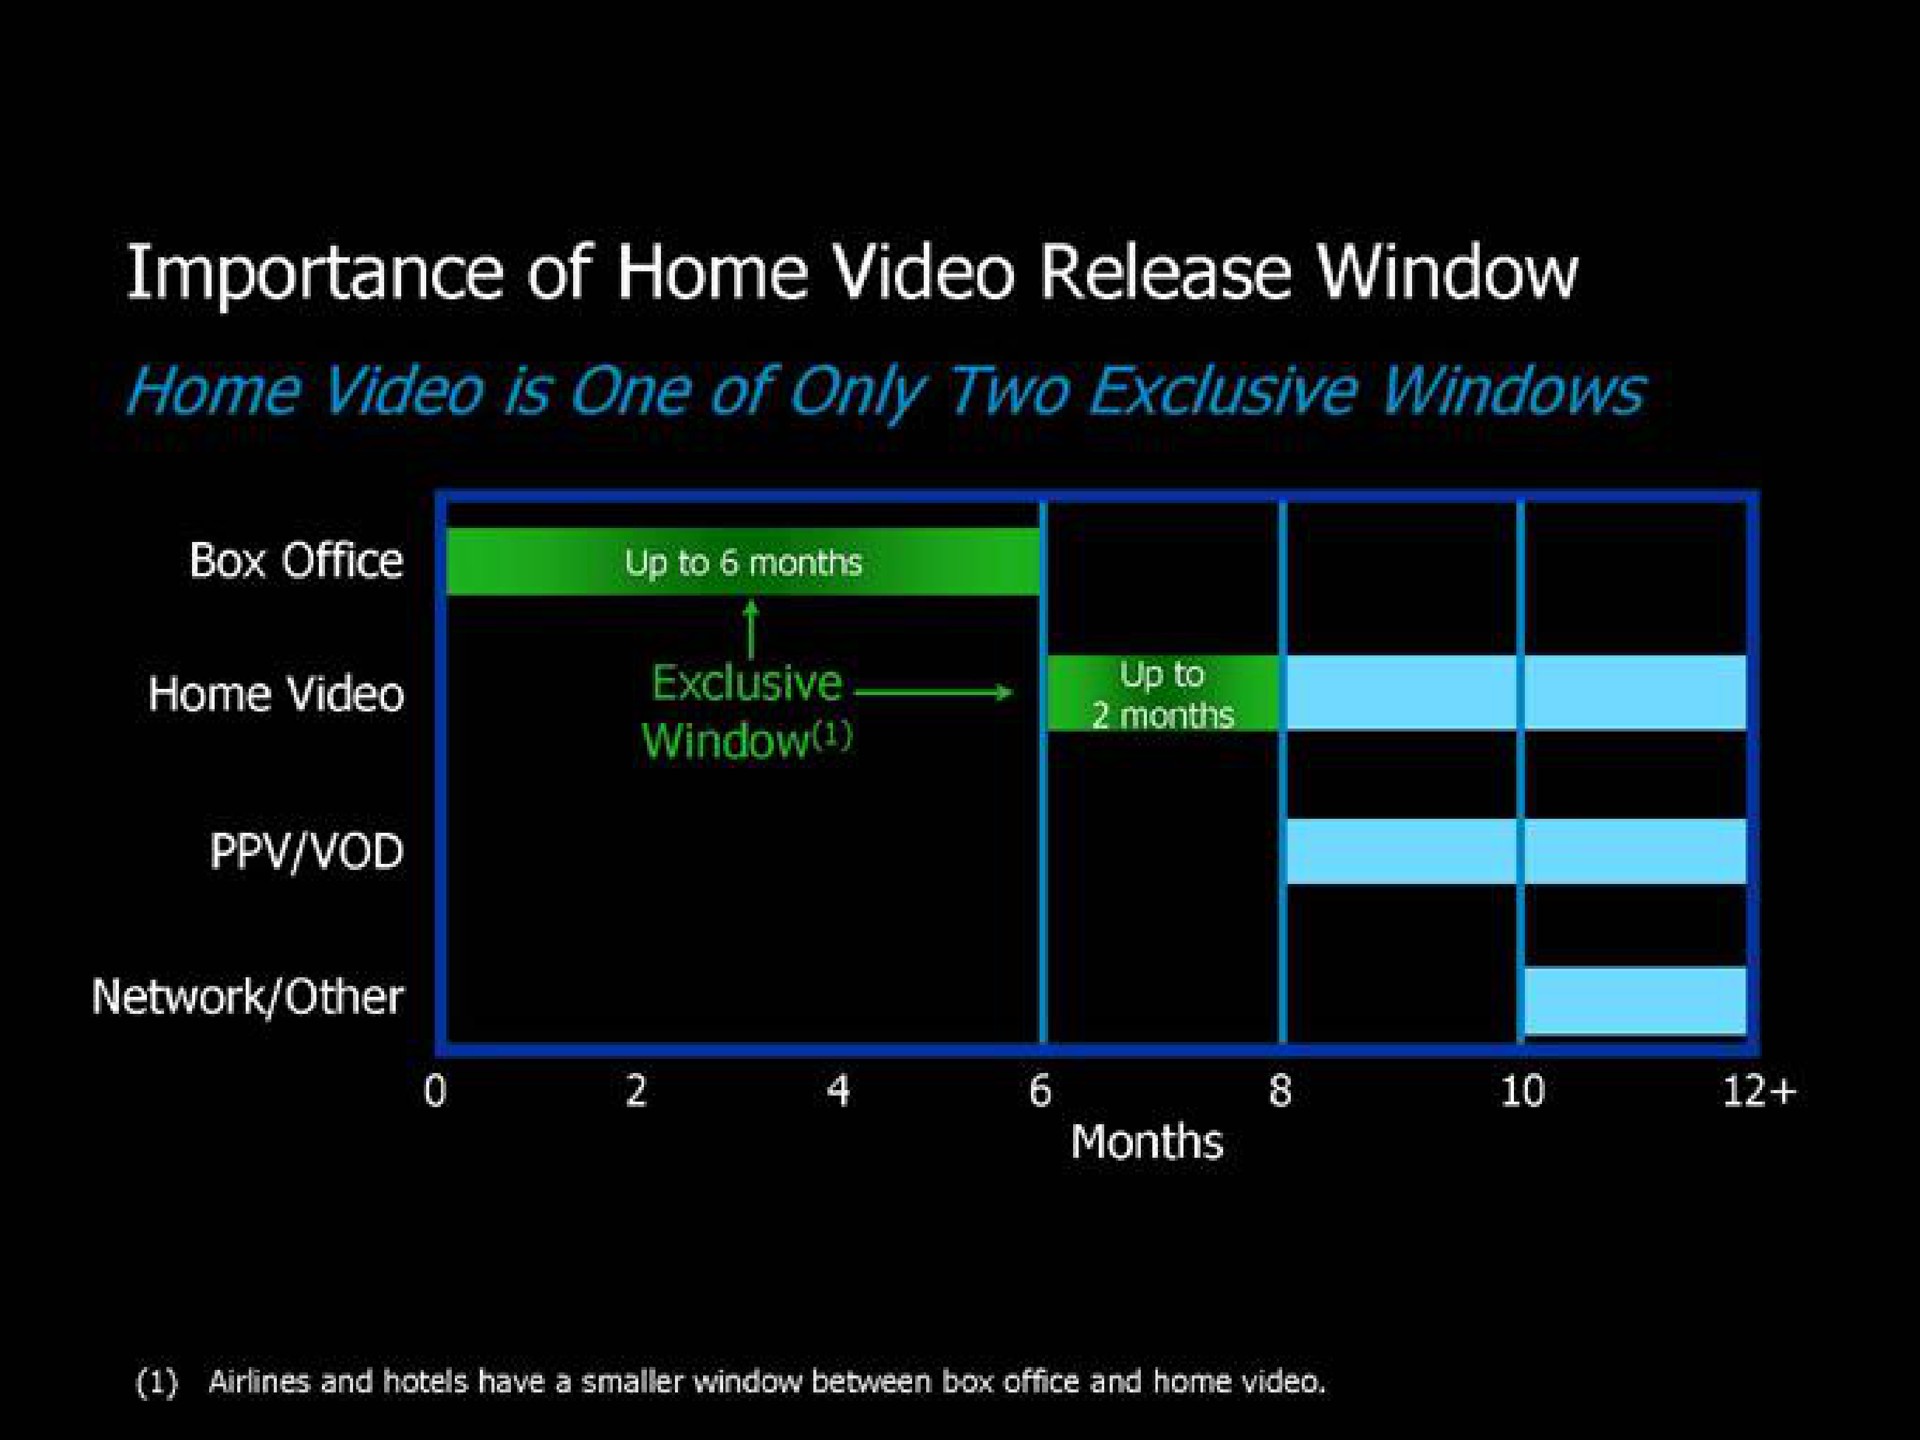 importance of home video release window | Blockbuster Video